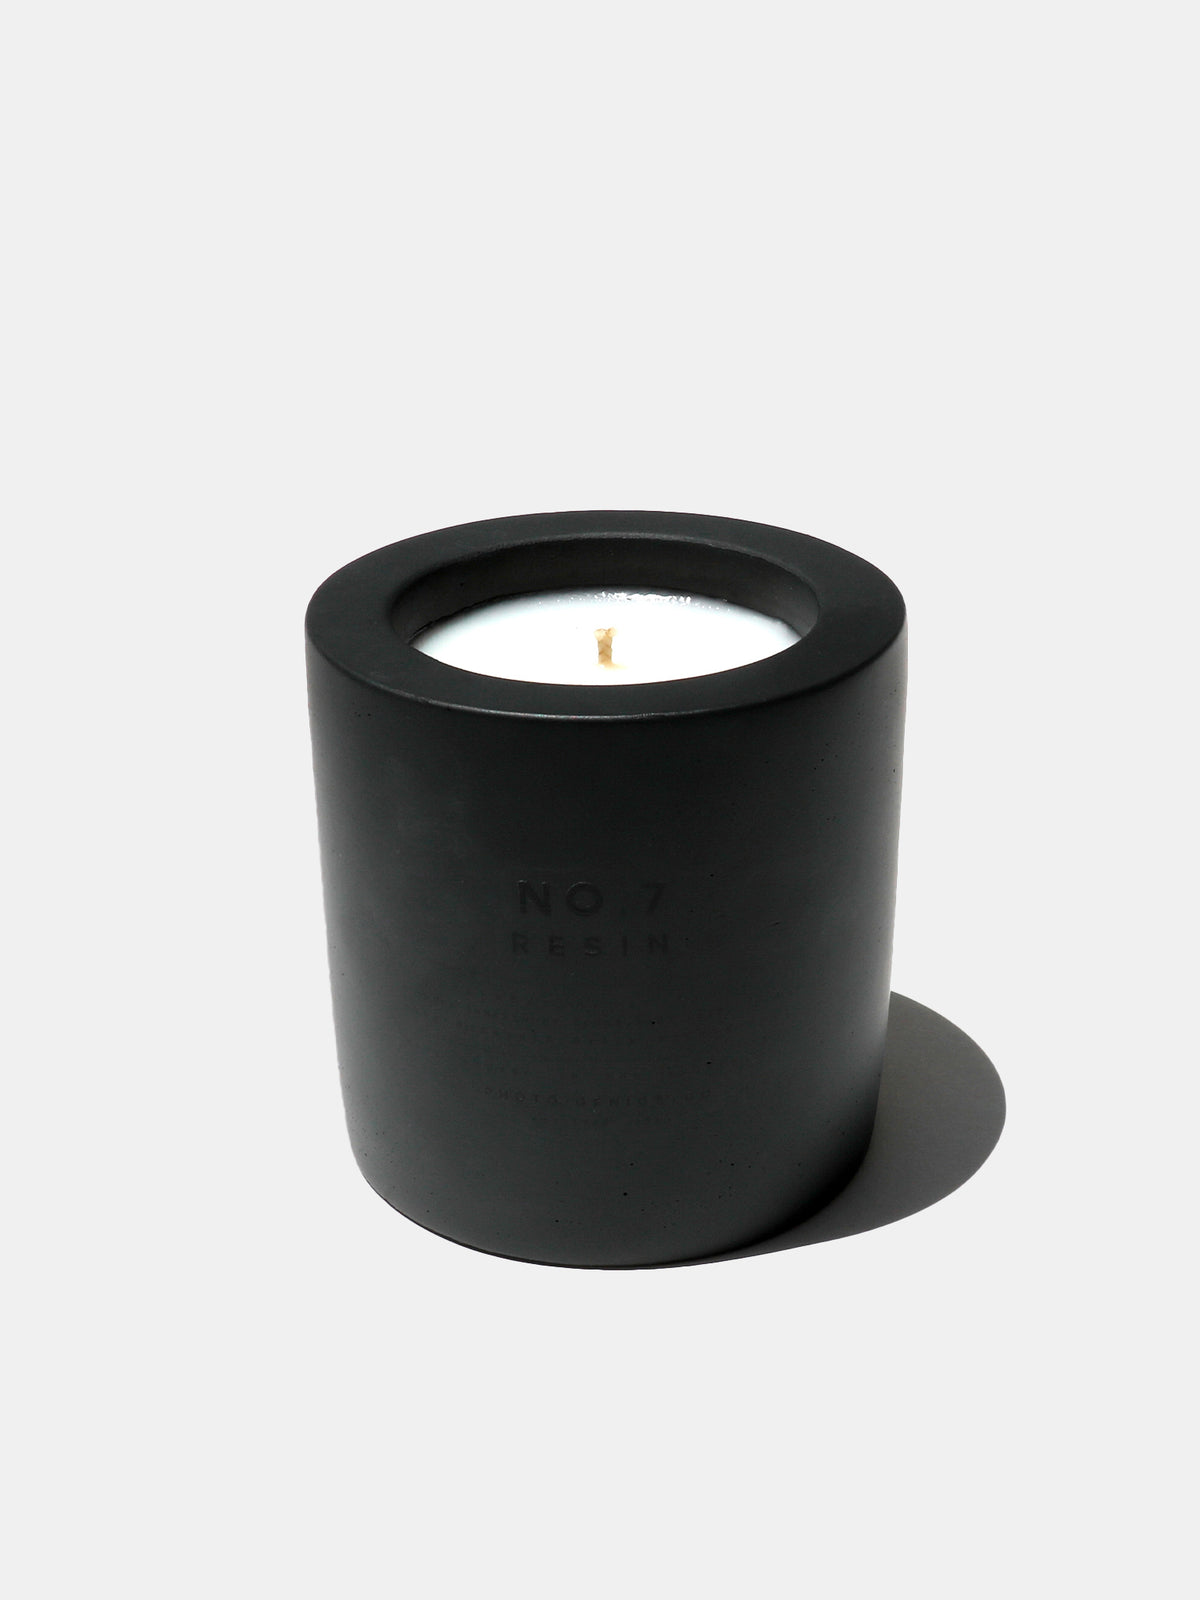 Resin Concrete Candle (CONCRETE-CANDLE-RESIN)